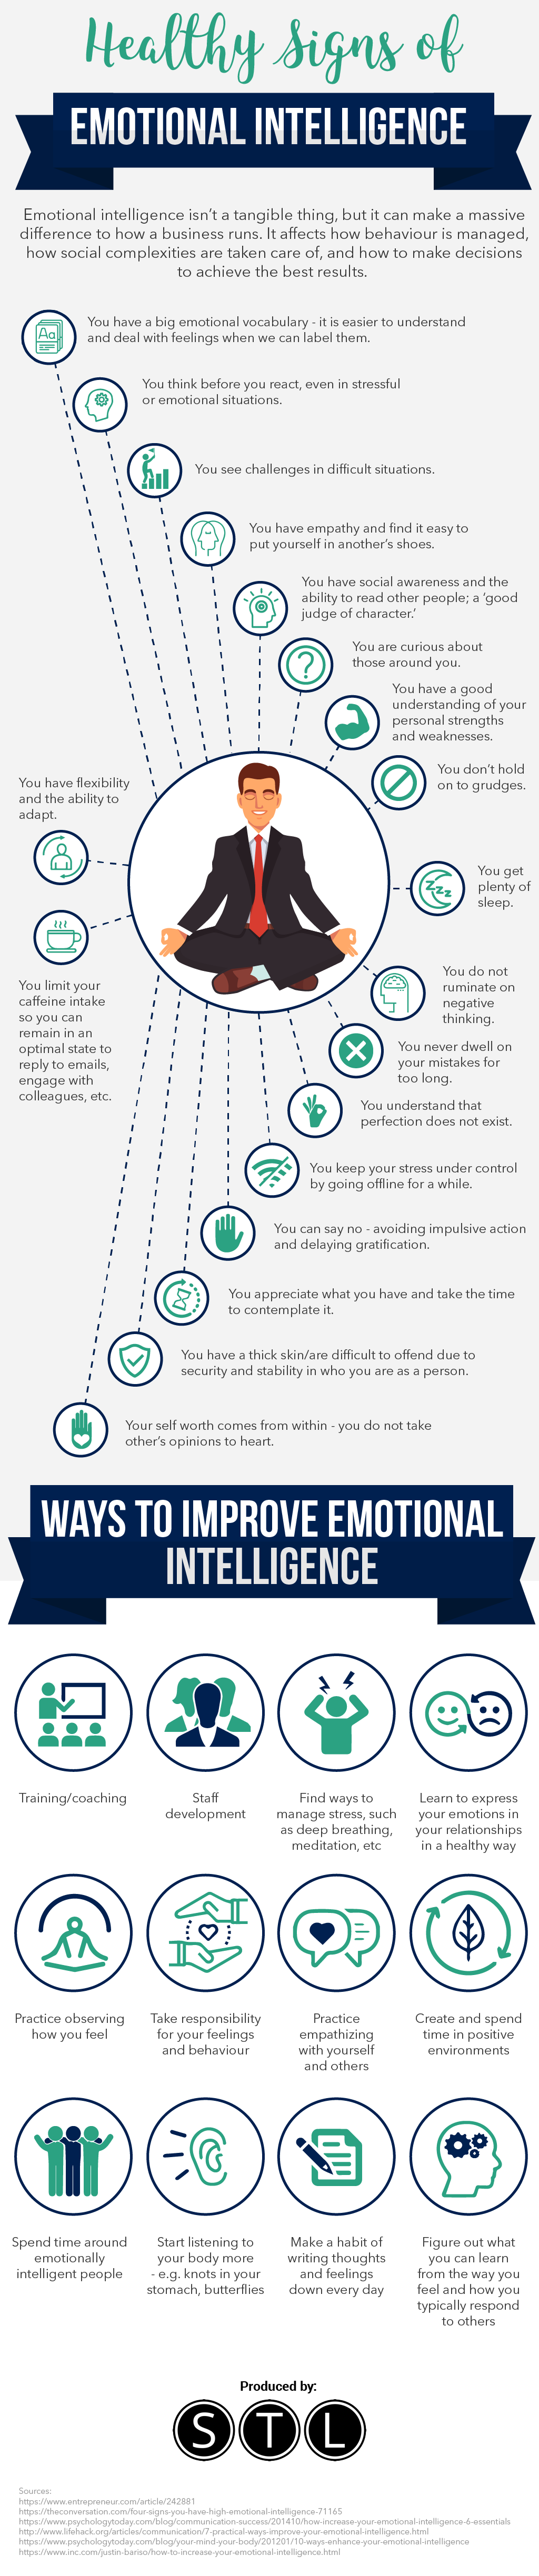 Healthy Signs of Emotional Intelligence